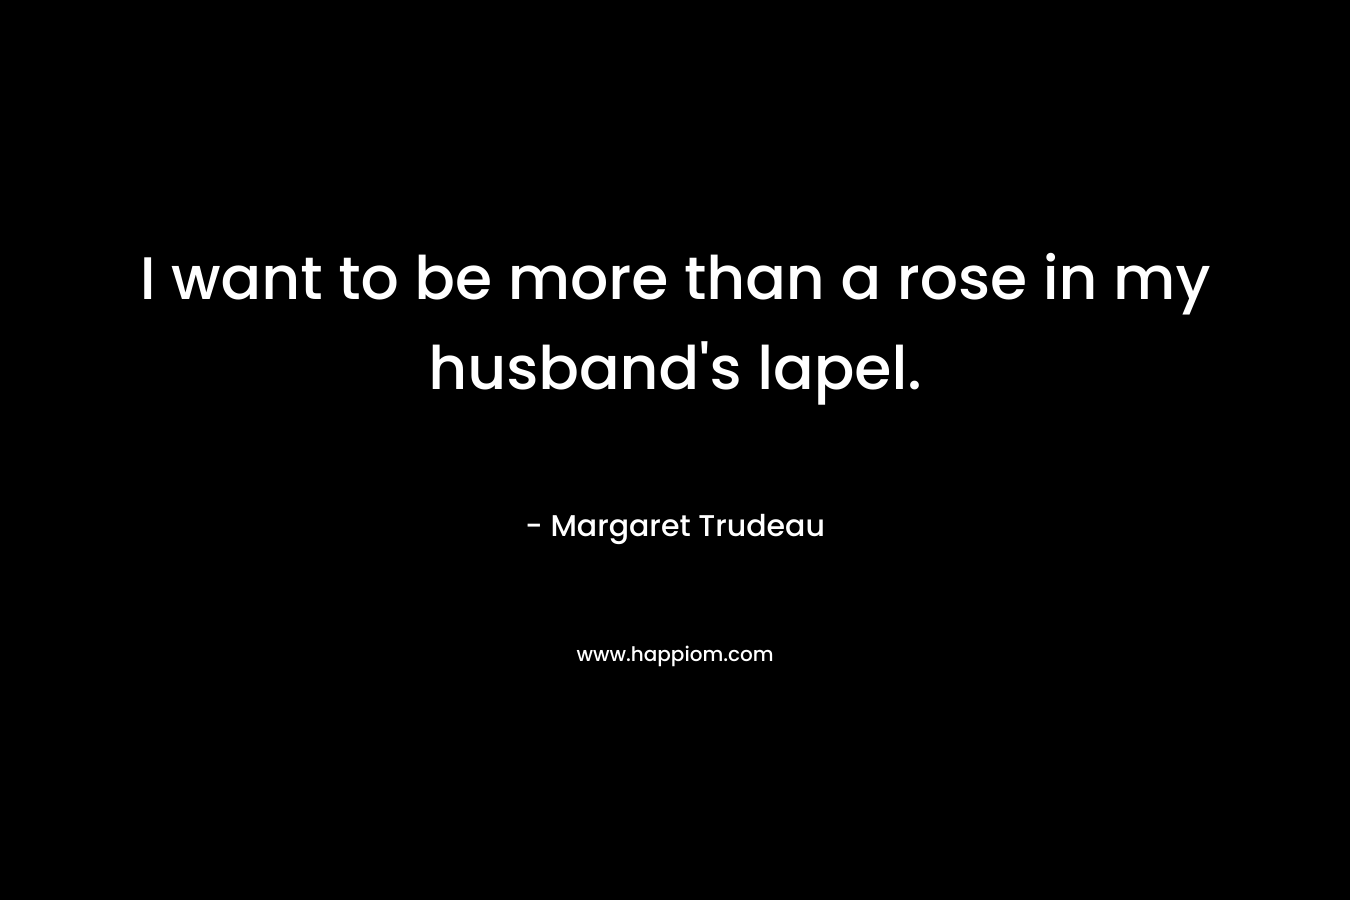 I want to be more than a rose in my husband's lapel.